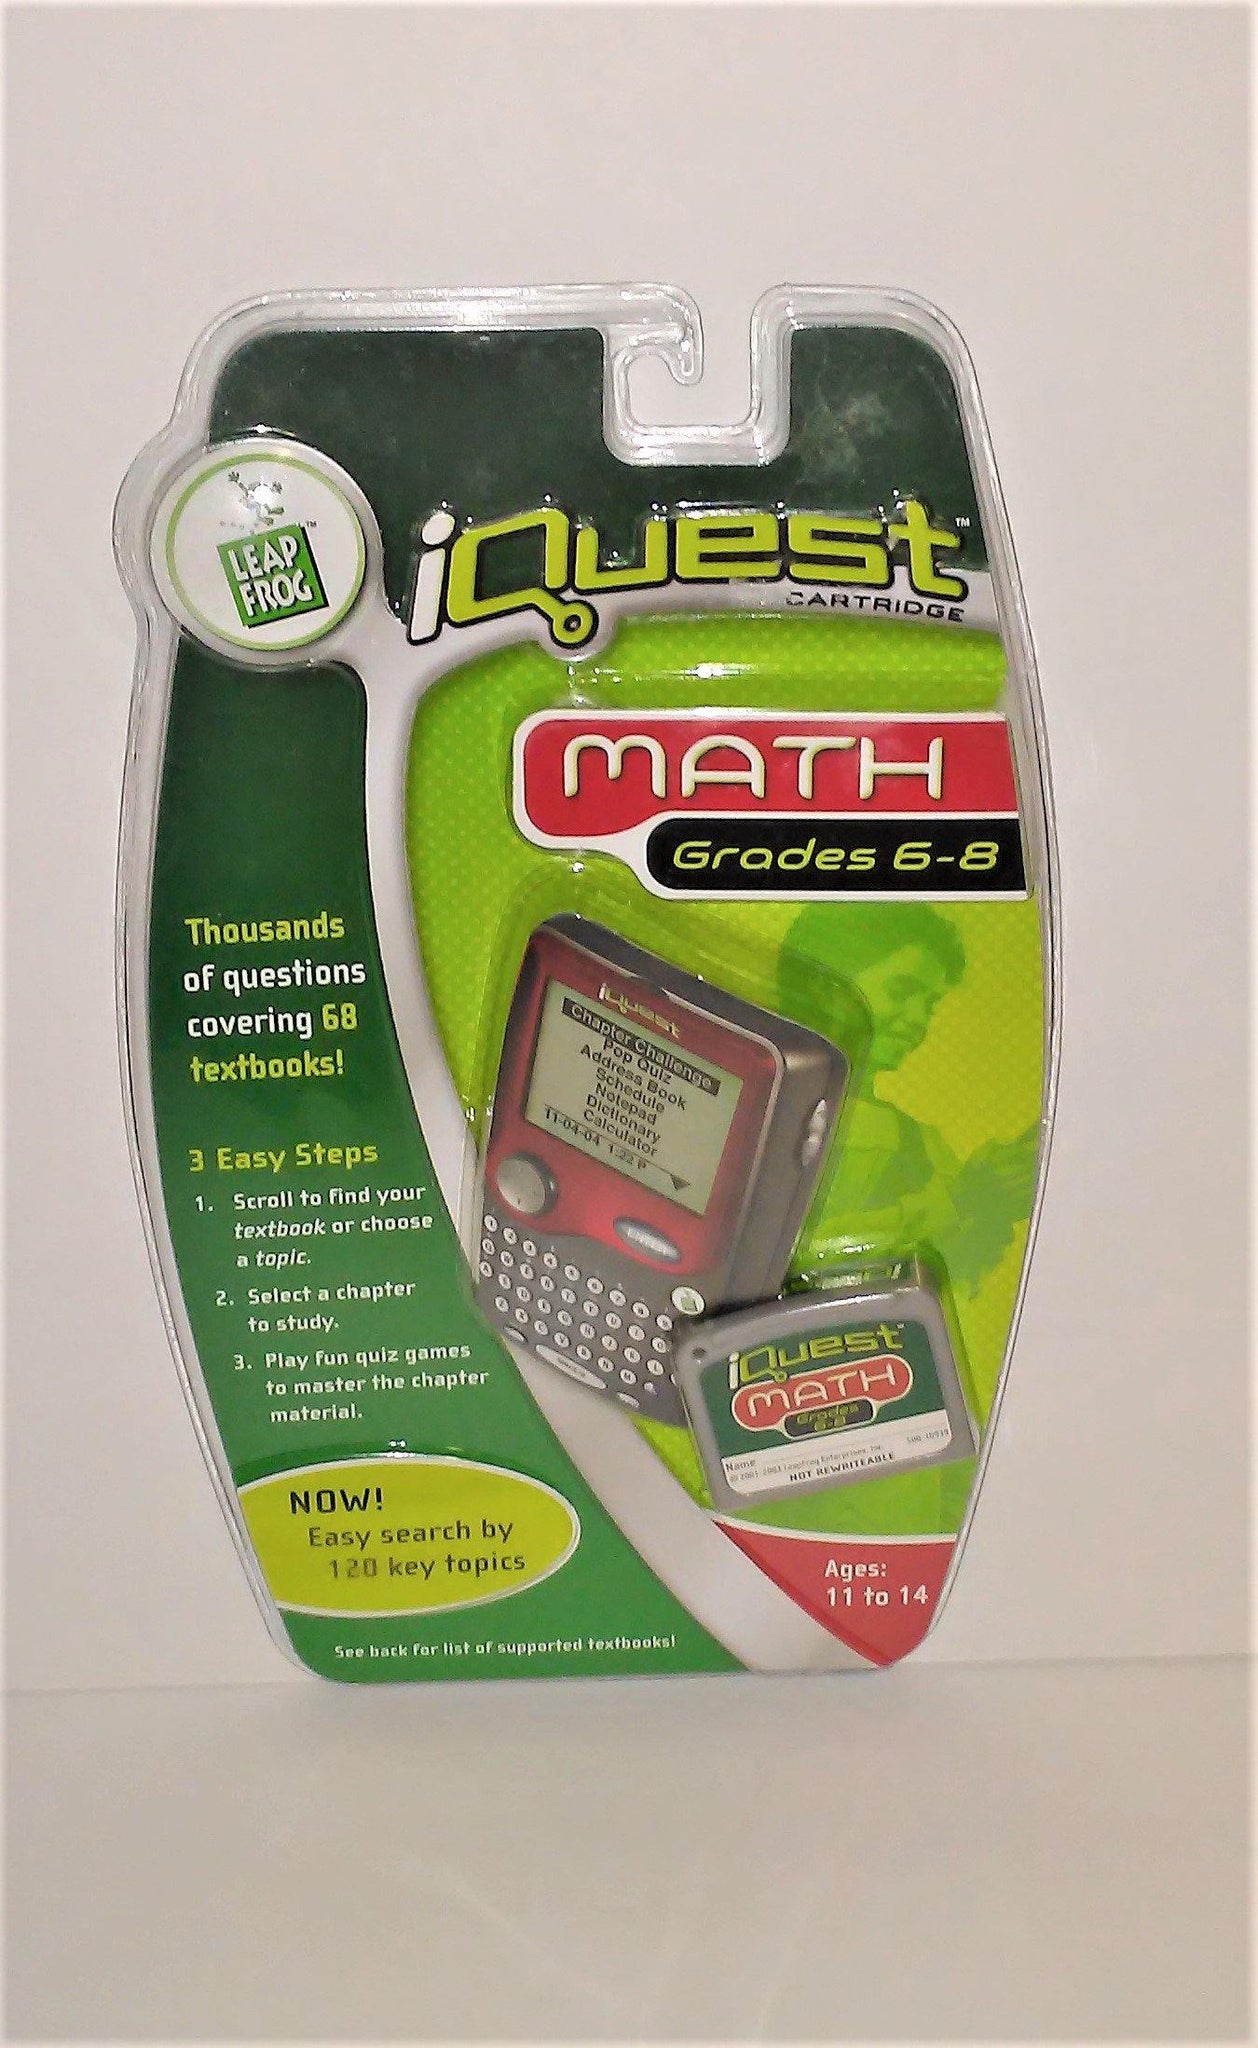 Leap Frog IQUEST MATH Grades 6-8 Educational Cartridge for ages 11